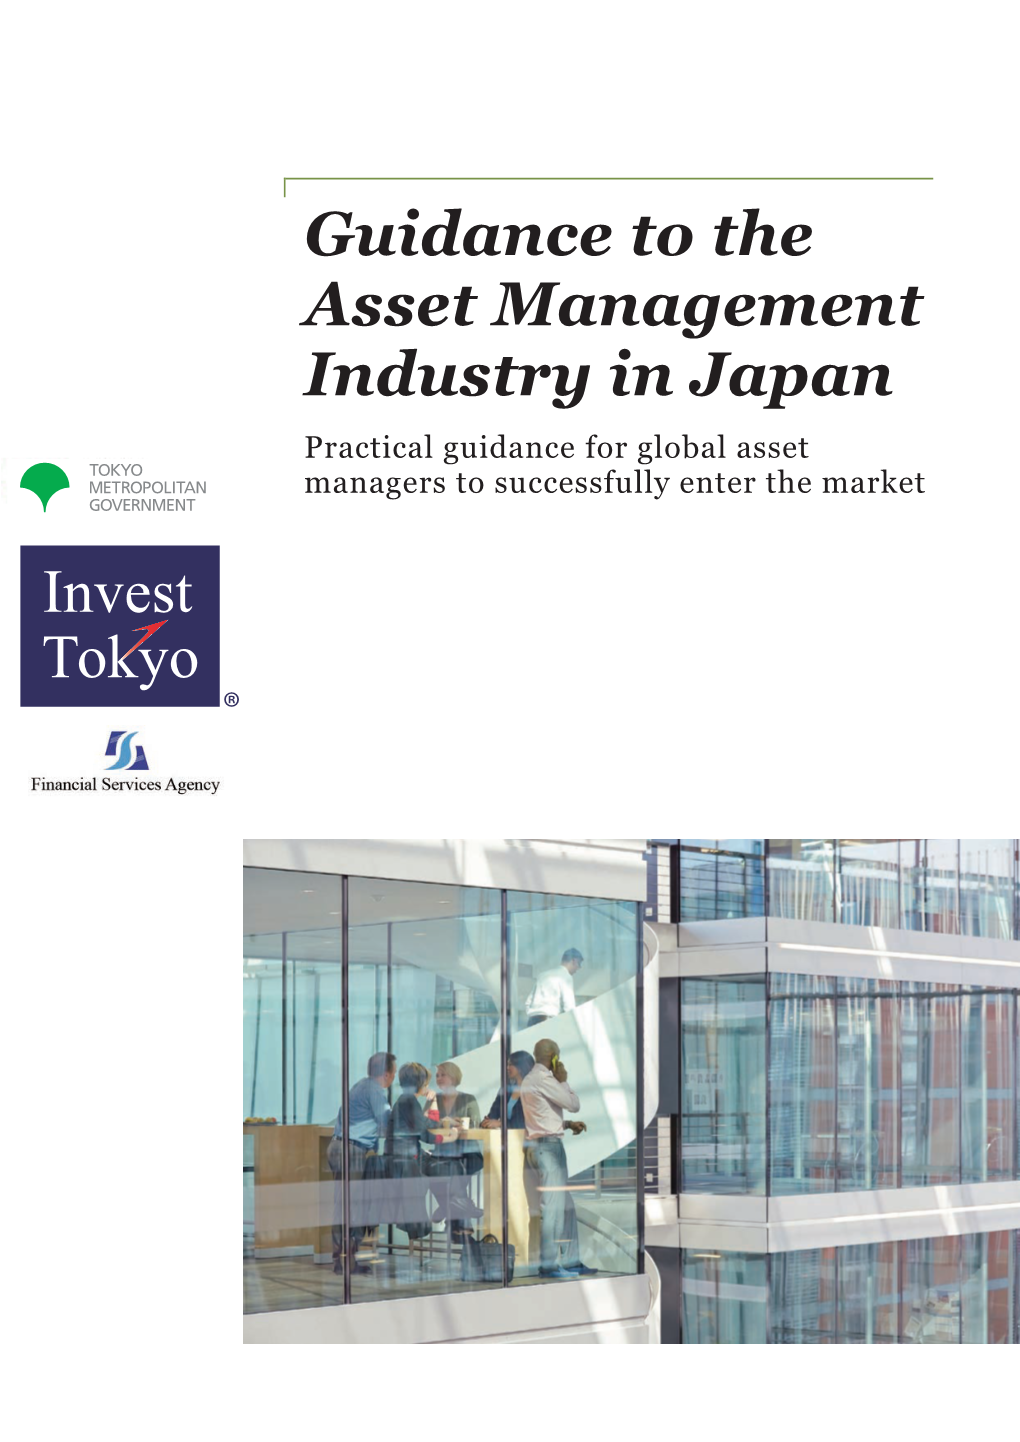 Guidance to the Asset Management Industry in Japan Practical Guidance for Global Asset Managers to Successfully Enter the Market